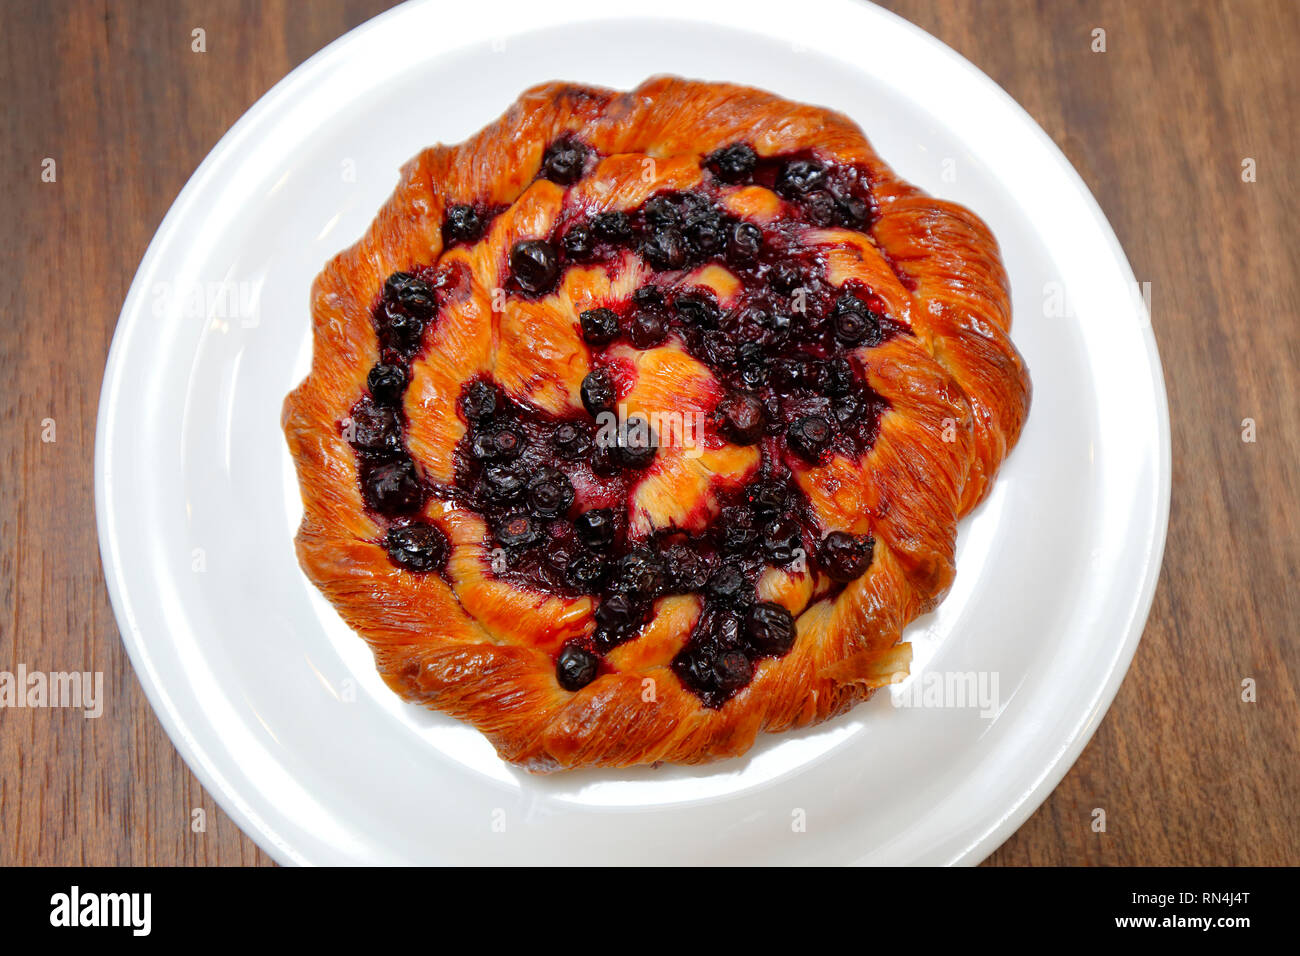 Huckleberry pastry at Sea Wolf Bakers, Seattle, WA Stock Photo